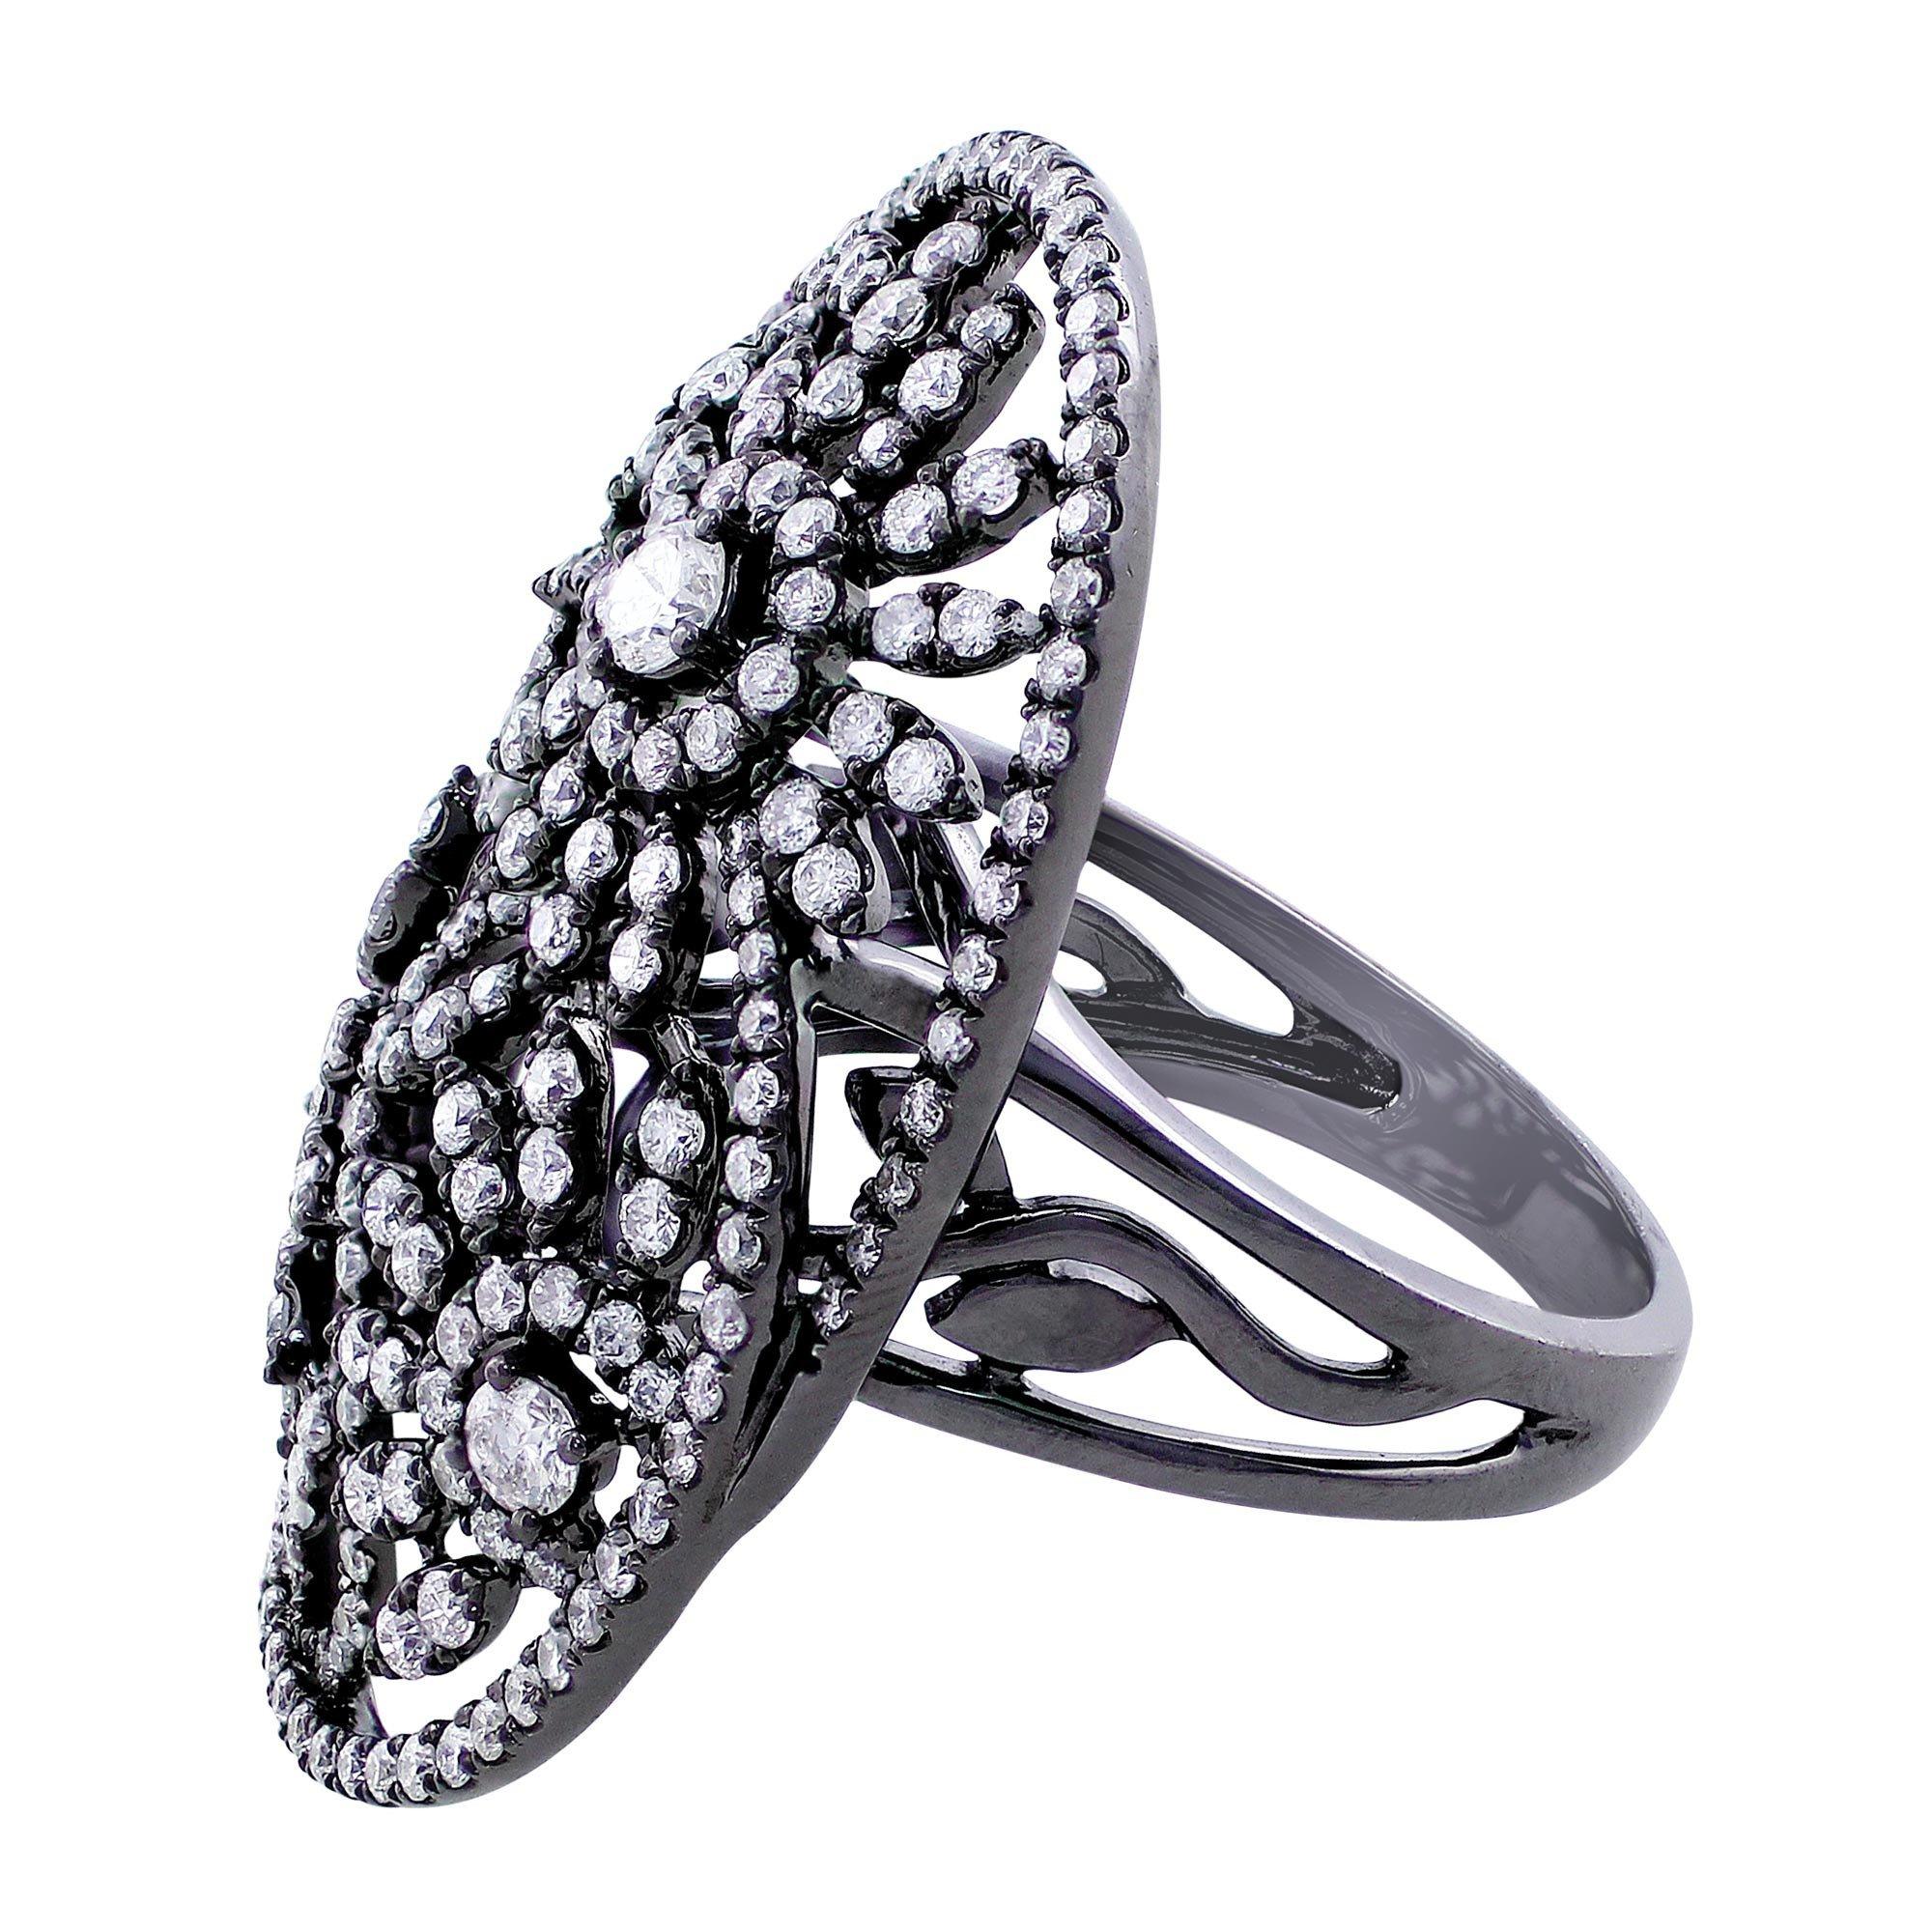 Black Rhodium Floral Scroll Ring. A delicate 18k white gold and black rhodium oval ring in a floral scroll design set with pave diamonds weighing 1.98 carats total weight. The floral scroll design extends down the ring shank.

Size 6.75